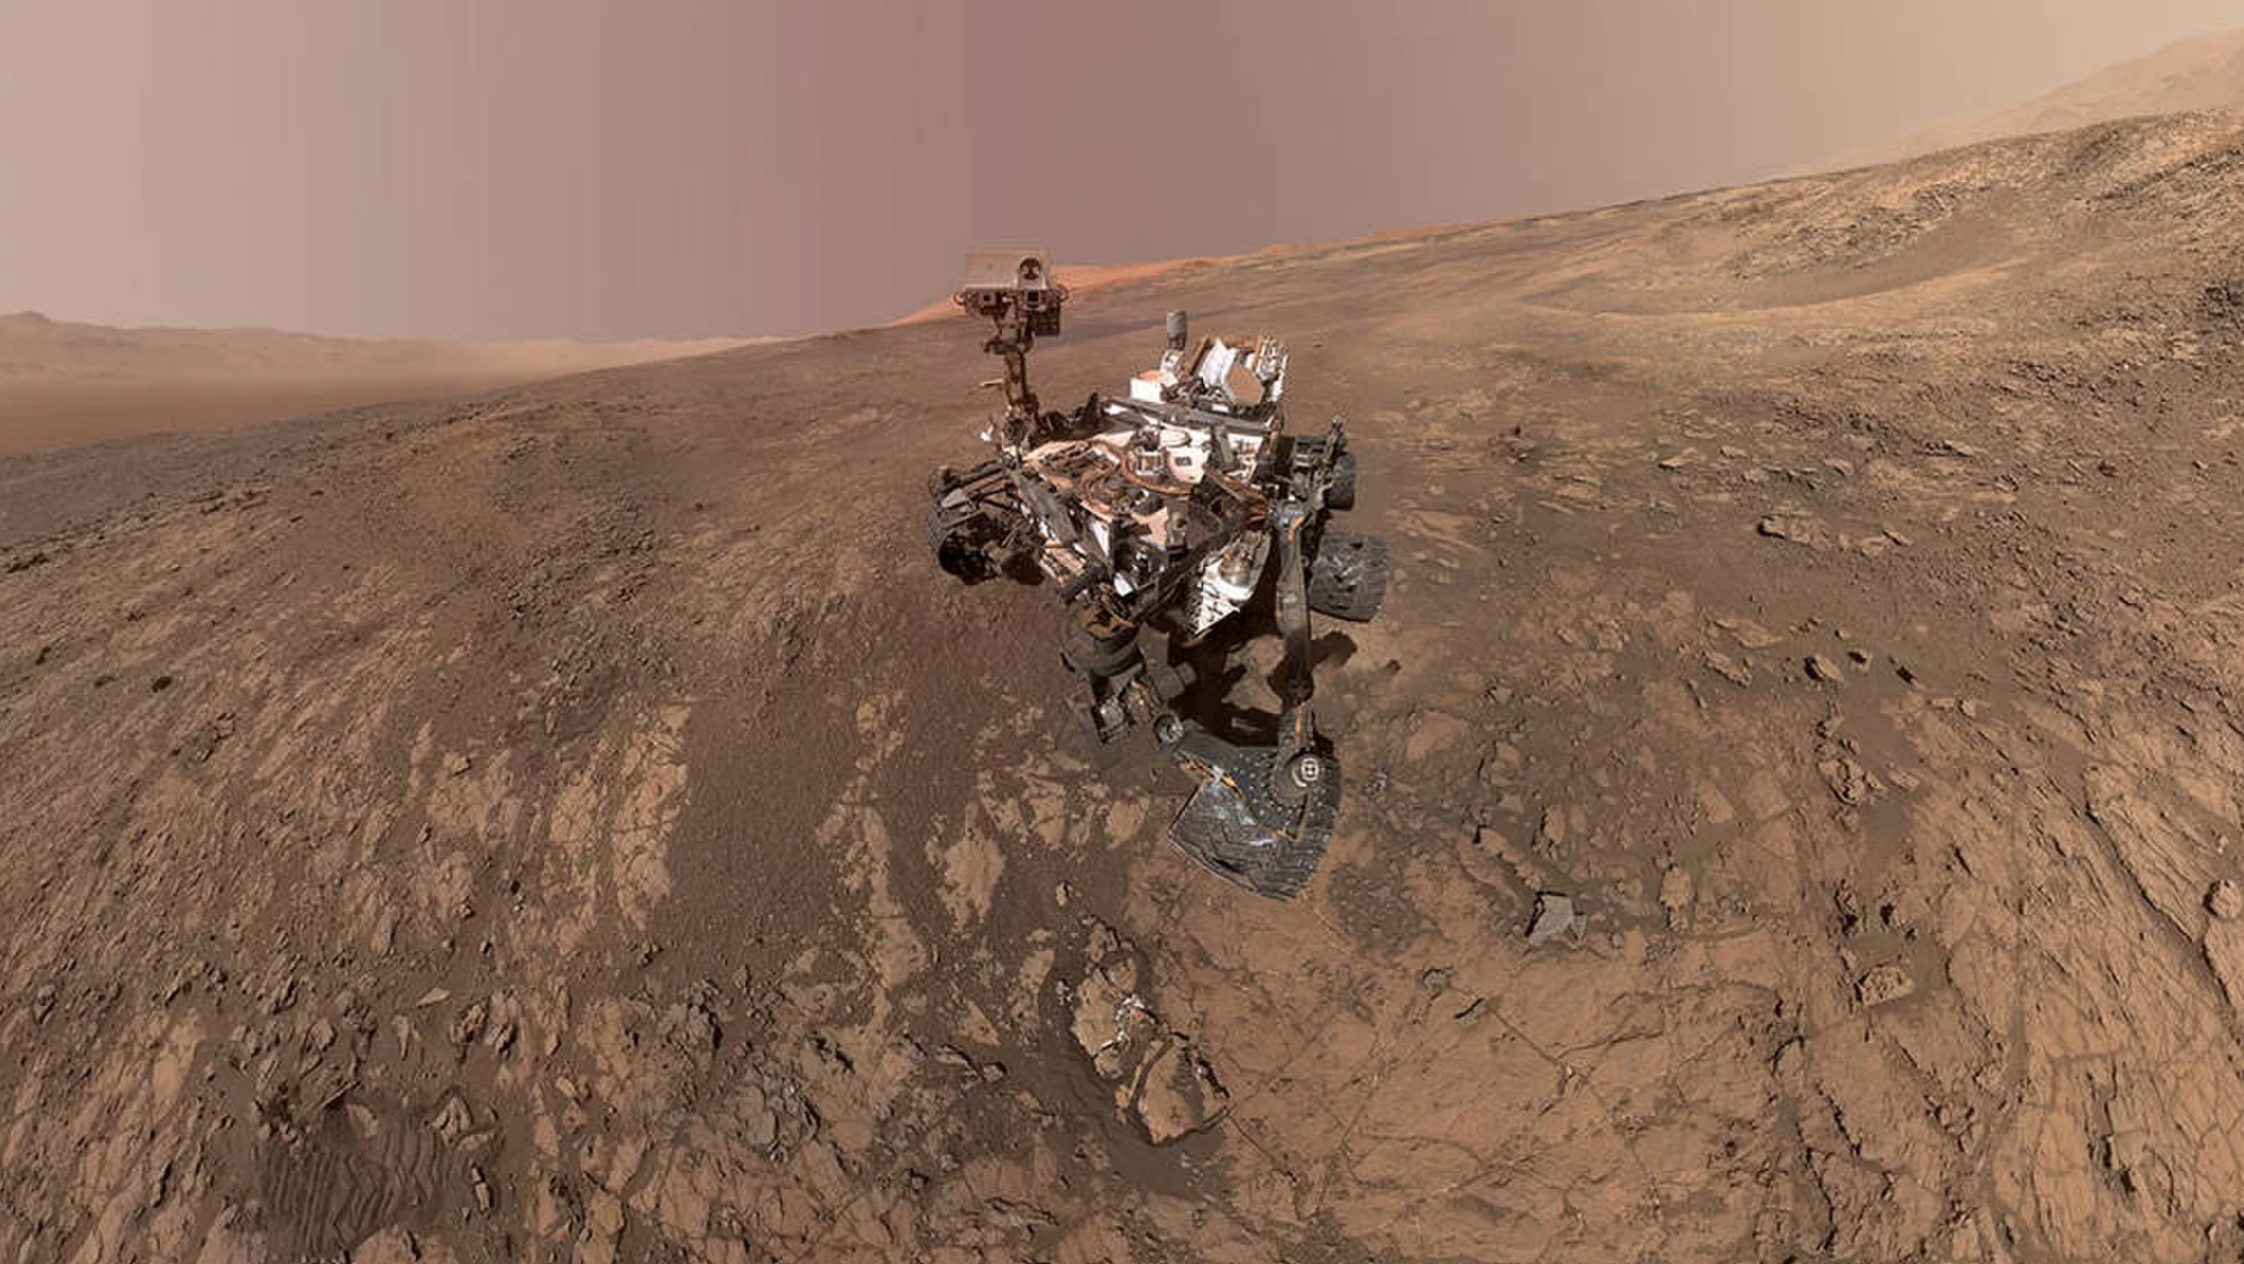 NASA's Curiosity Mars rover took this self-portrait on Jan. 23, 2018, on the slopes of the towering Mount Sharp.
Credit: NASA/JPL-Caltech/MSSS